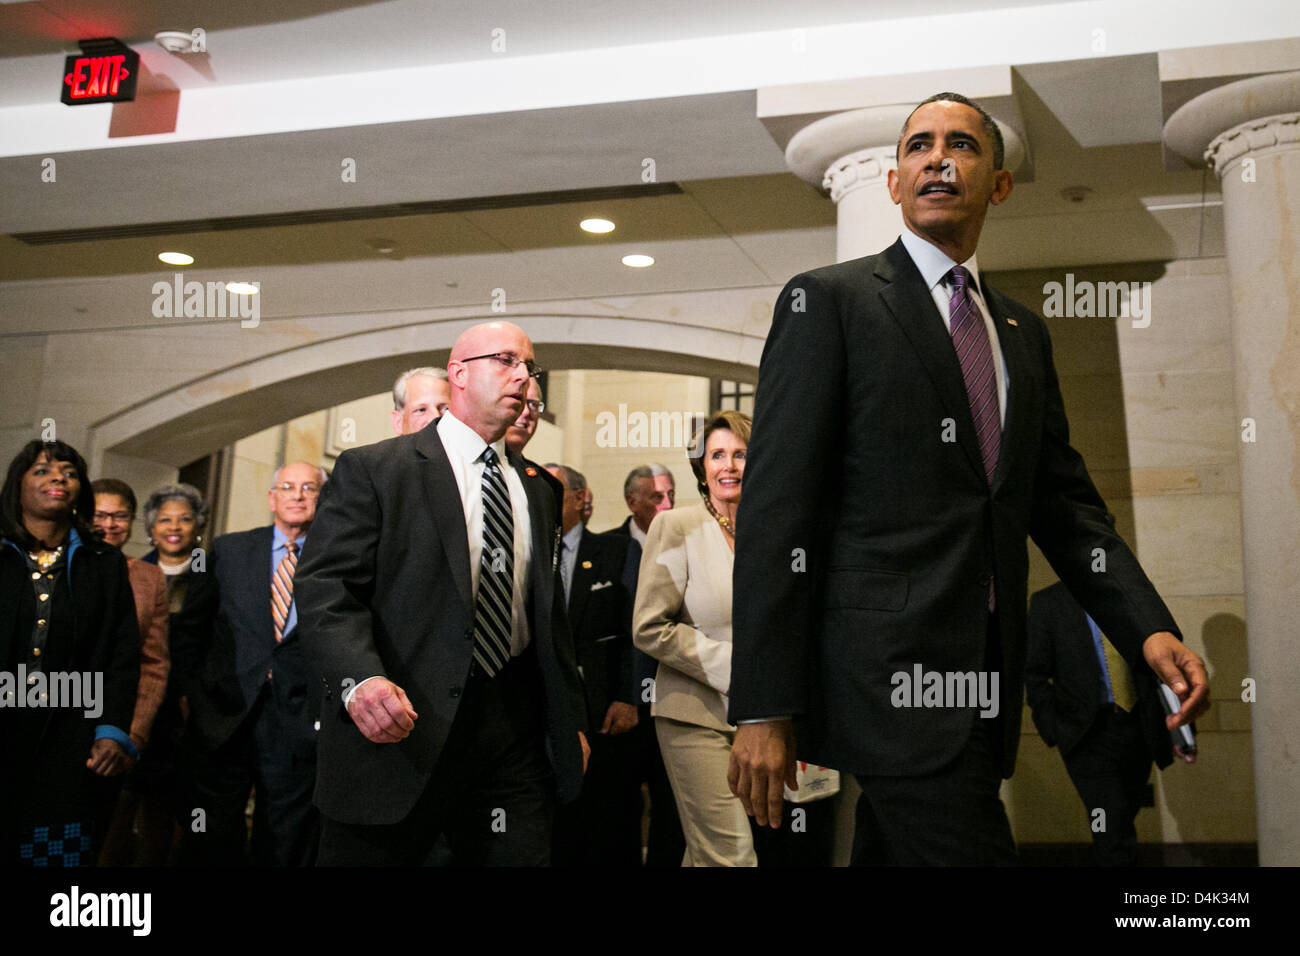 Washington DC, USA. 14th March 2013. United States President Barack Obama, walking with U.S. House Democratic Leader Nancy Pelosi (Democrat of California - C), leaves a meeting at the U.S. Capitol with the House Democratic Caucus, on Capitol Hill in Washington, Thursday, March 14, 2013. Earlier in the day, President Obama also met with the Senate Republican Conference. .Credit: Drew Angerer / Pool via CNP/dpa/Alamy Live News Stock Photo